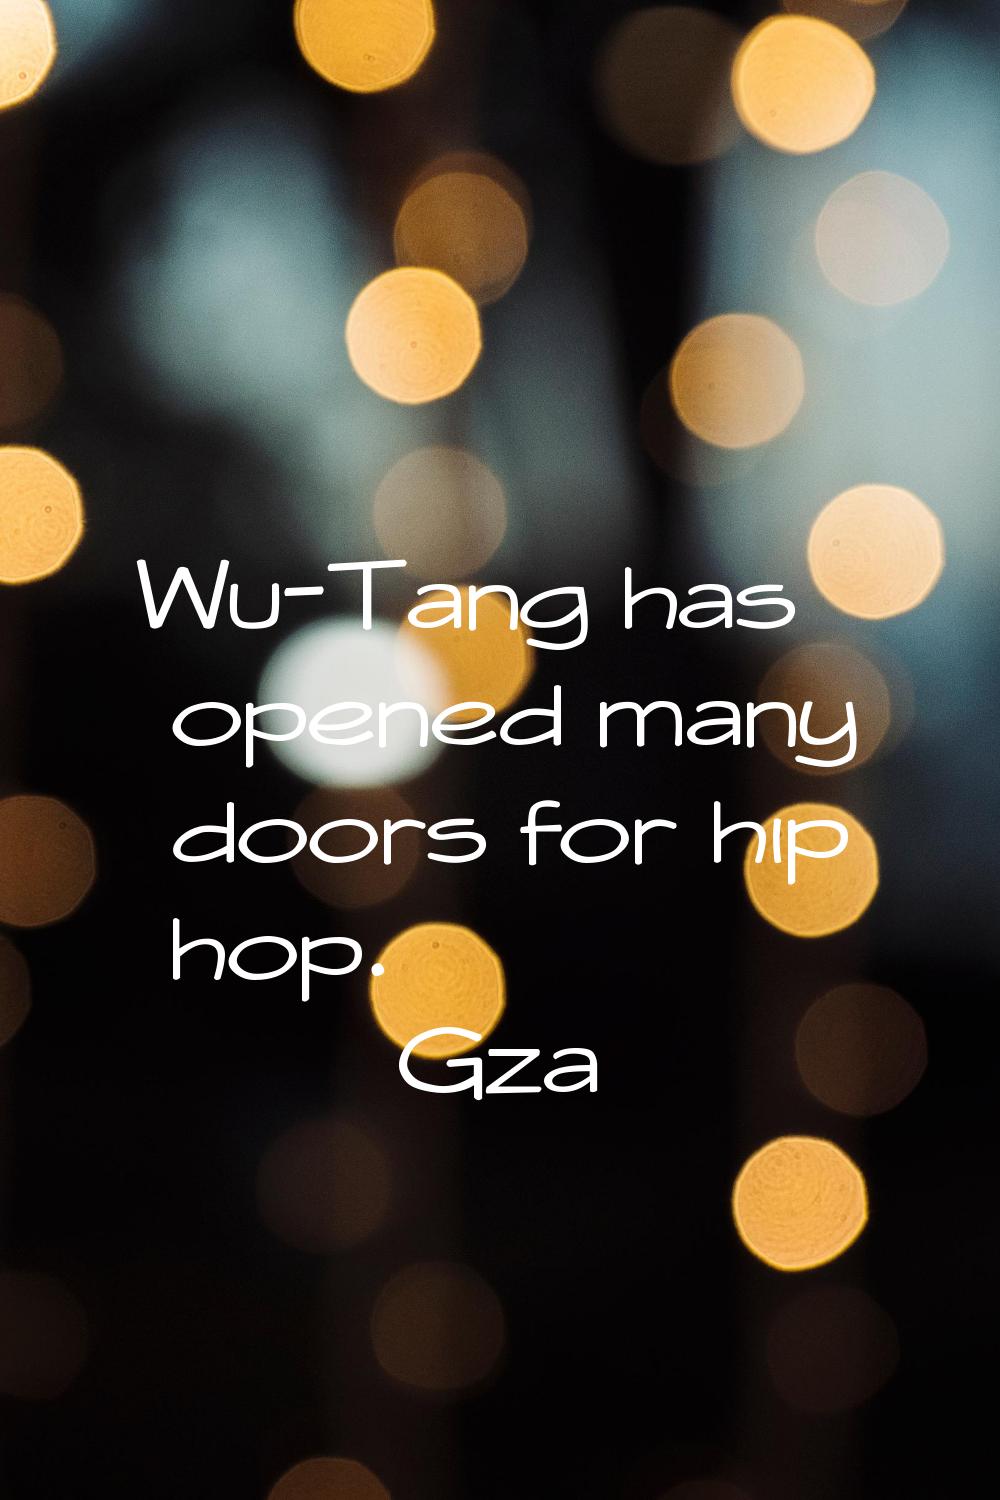 Wu-Tang has opened many doors for hip hop.